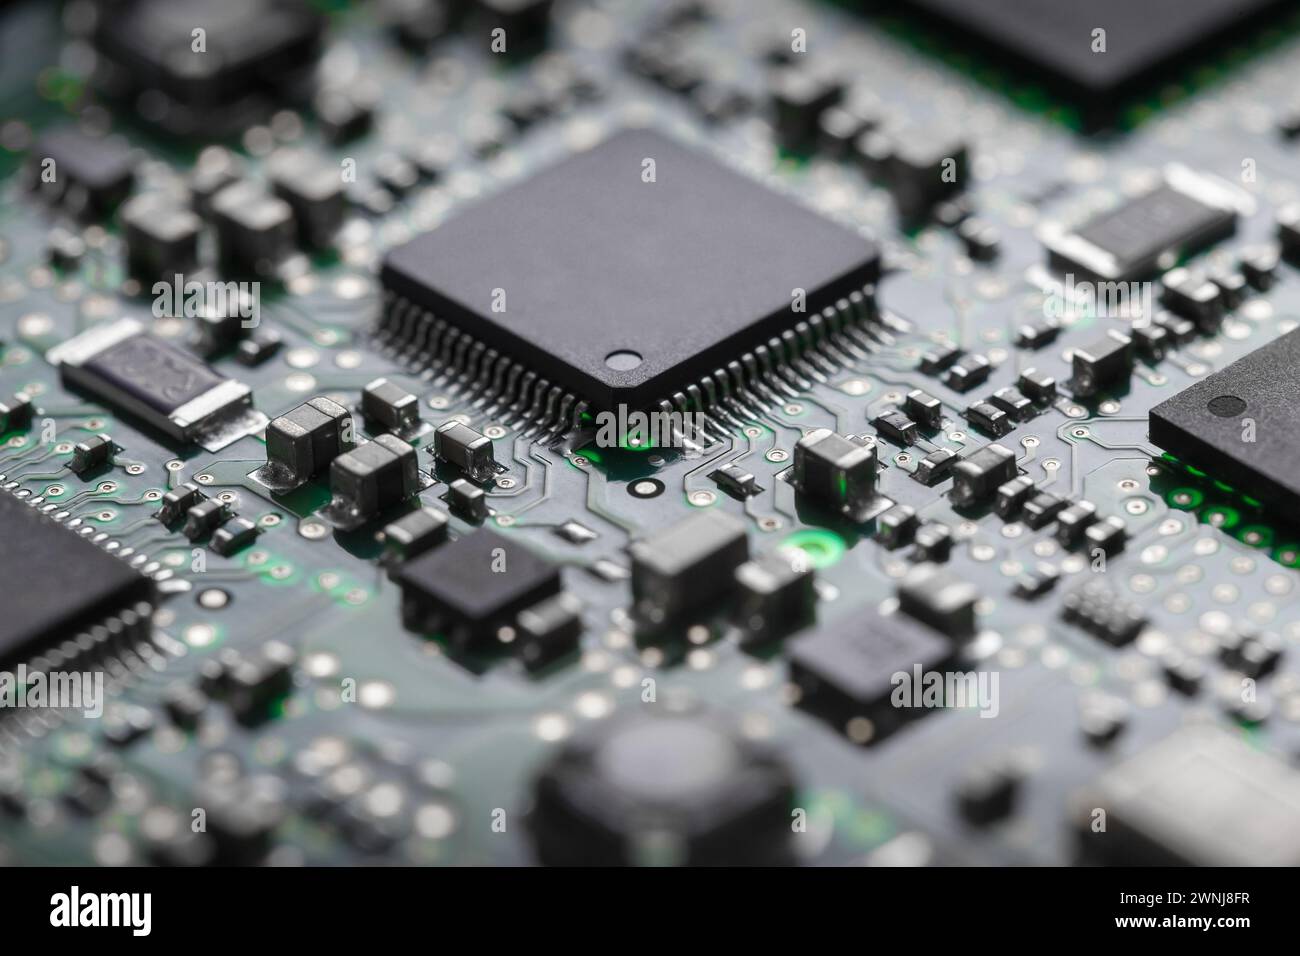 A close-up of a printed circuit board with a processor and various elements in backlight. Stock Photo